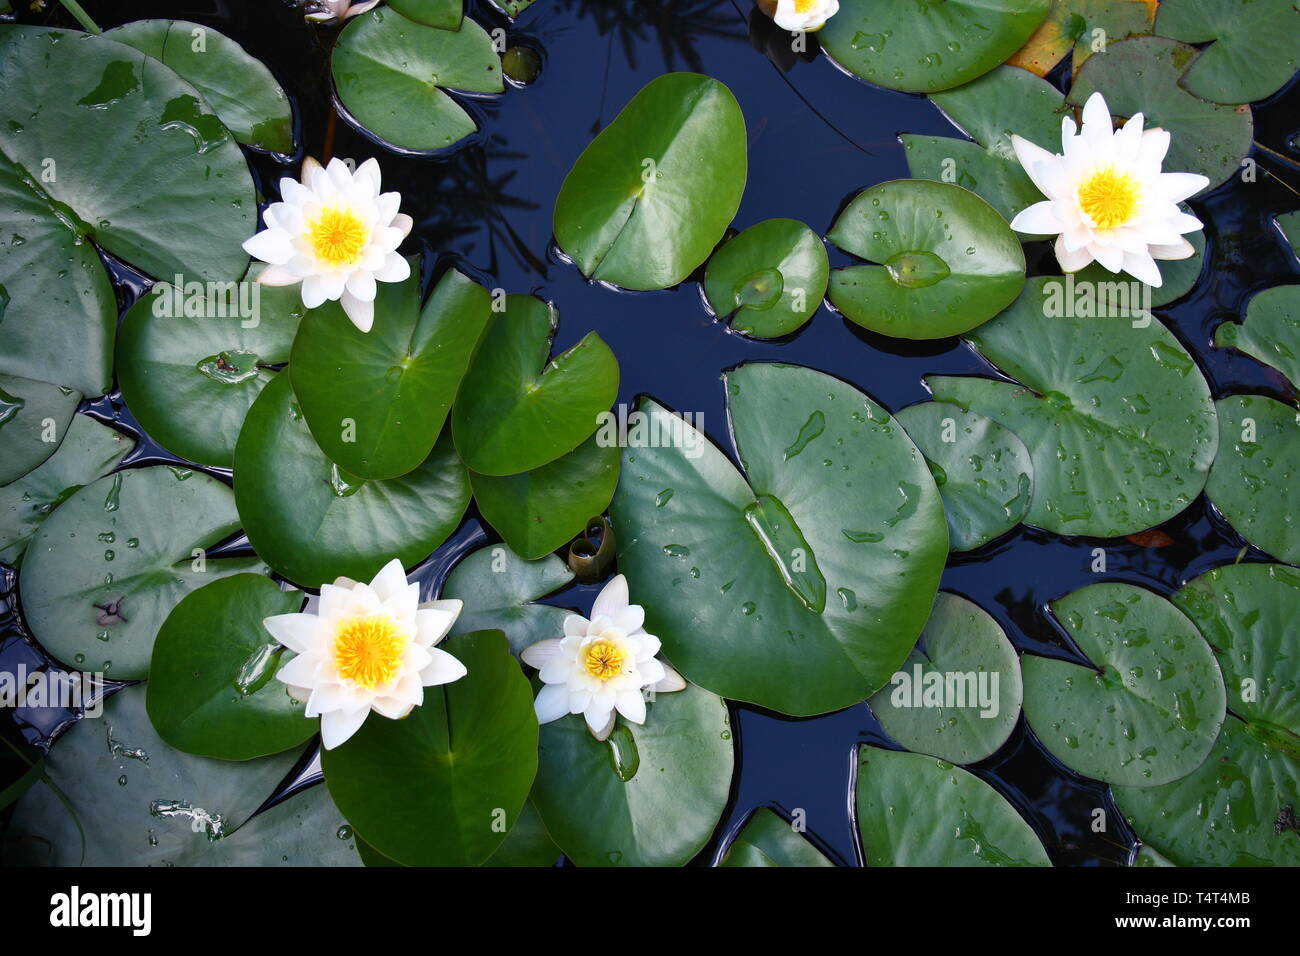 Several flowers of a white water lily (Nymphaea alba) Stock Photo